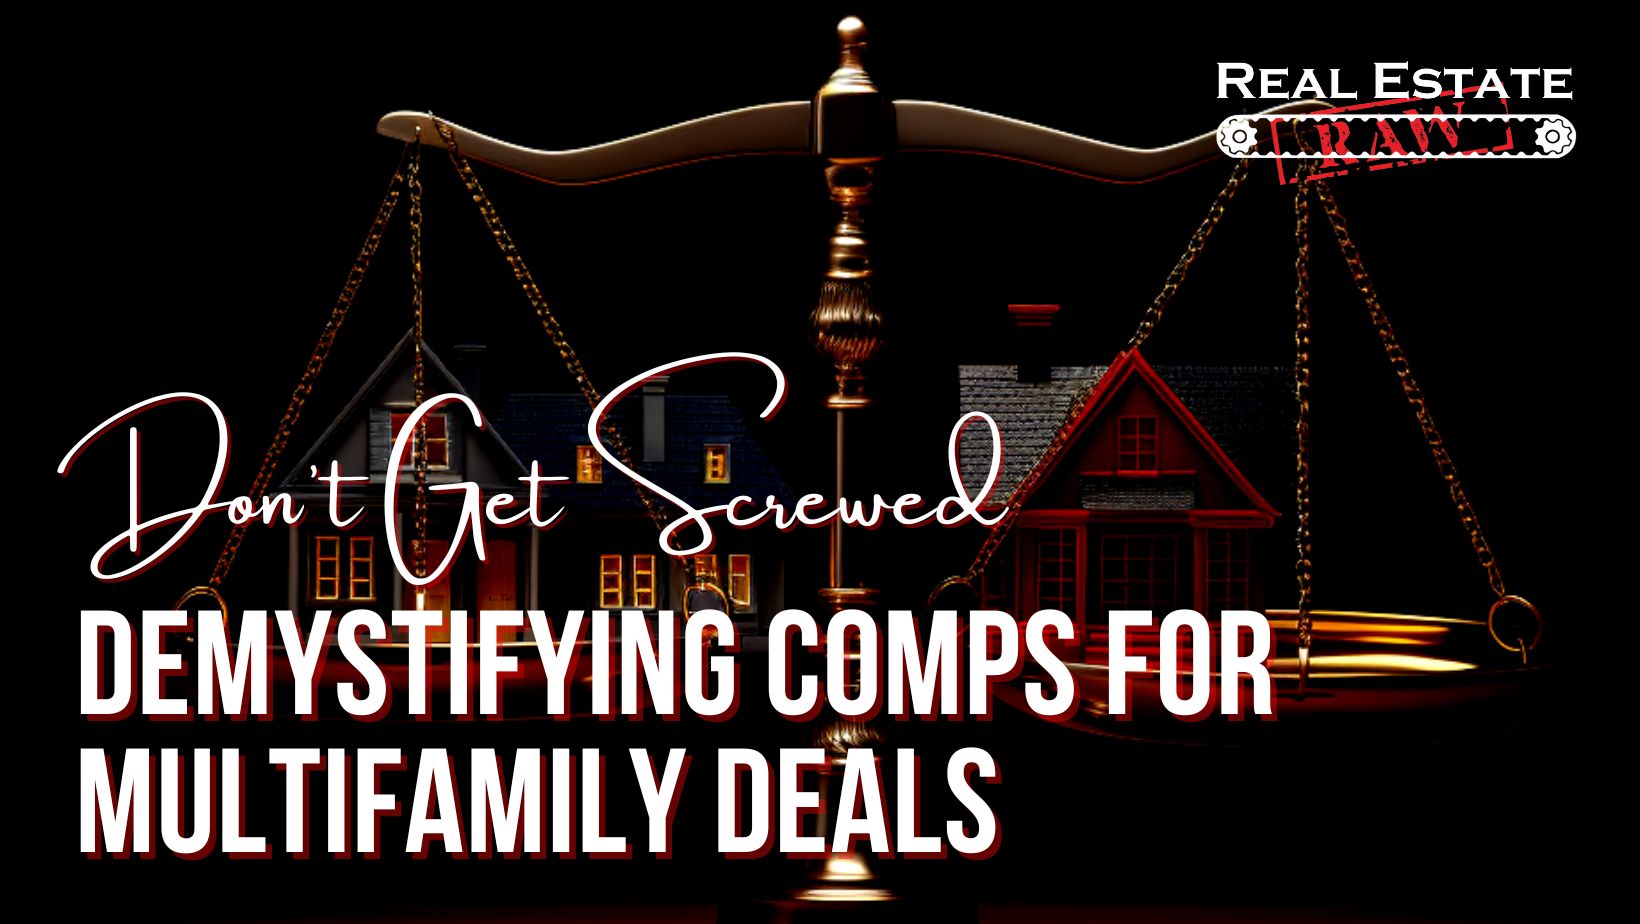 Demystifying Comps for Multifamily Deals